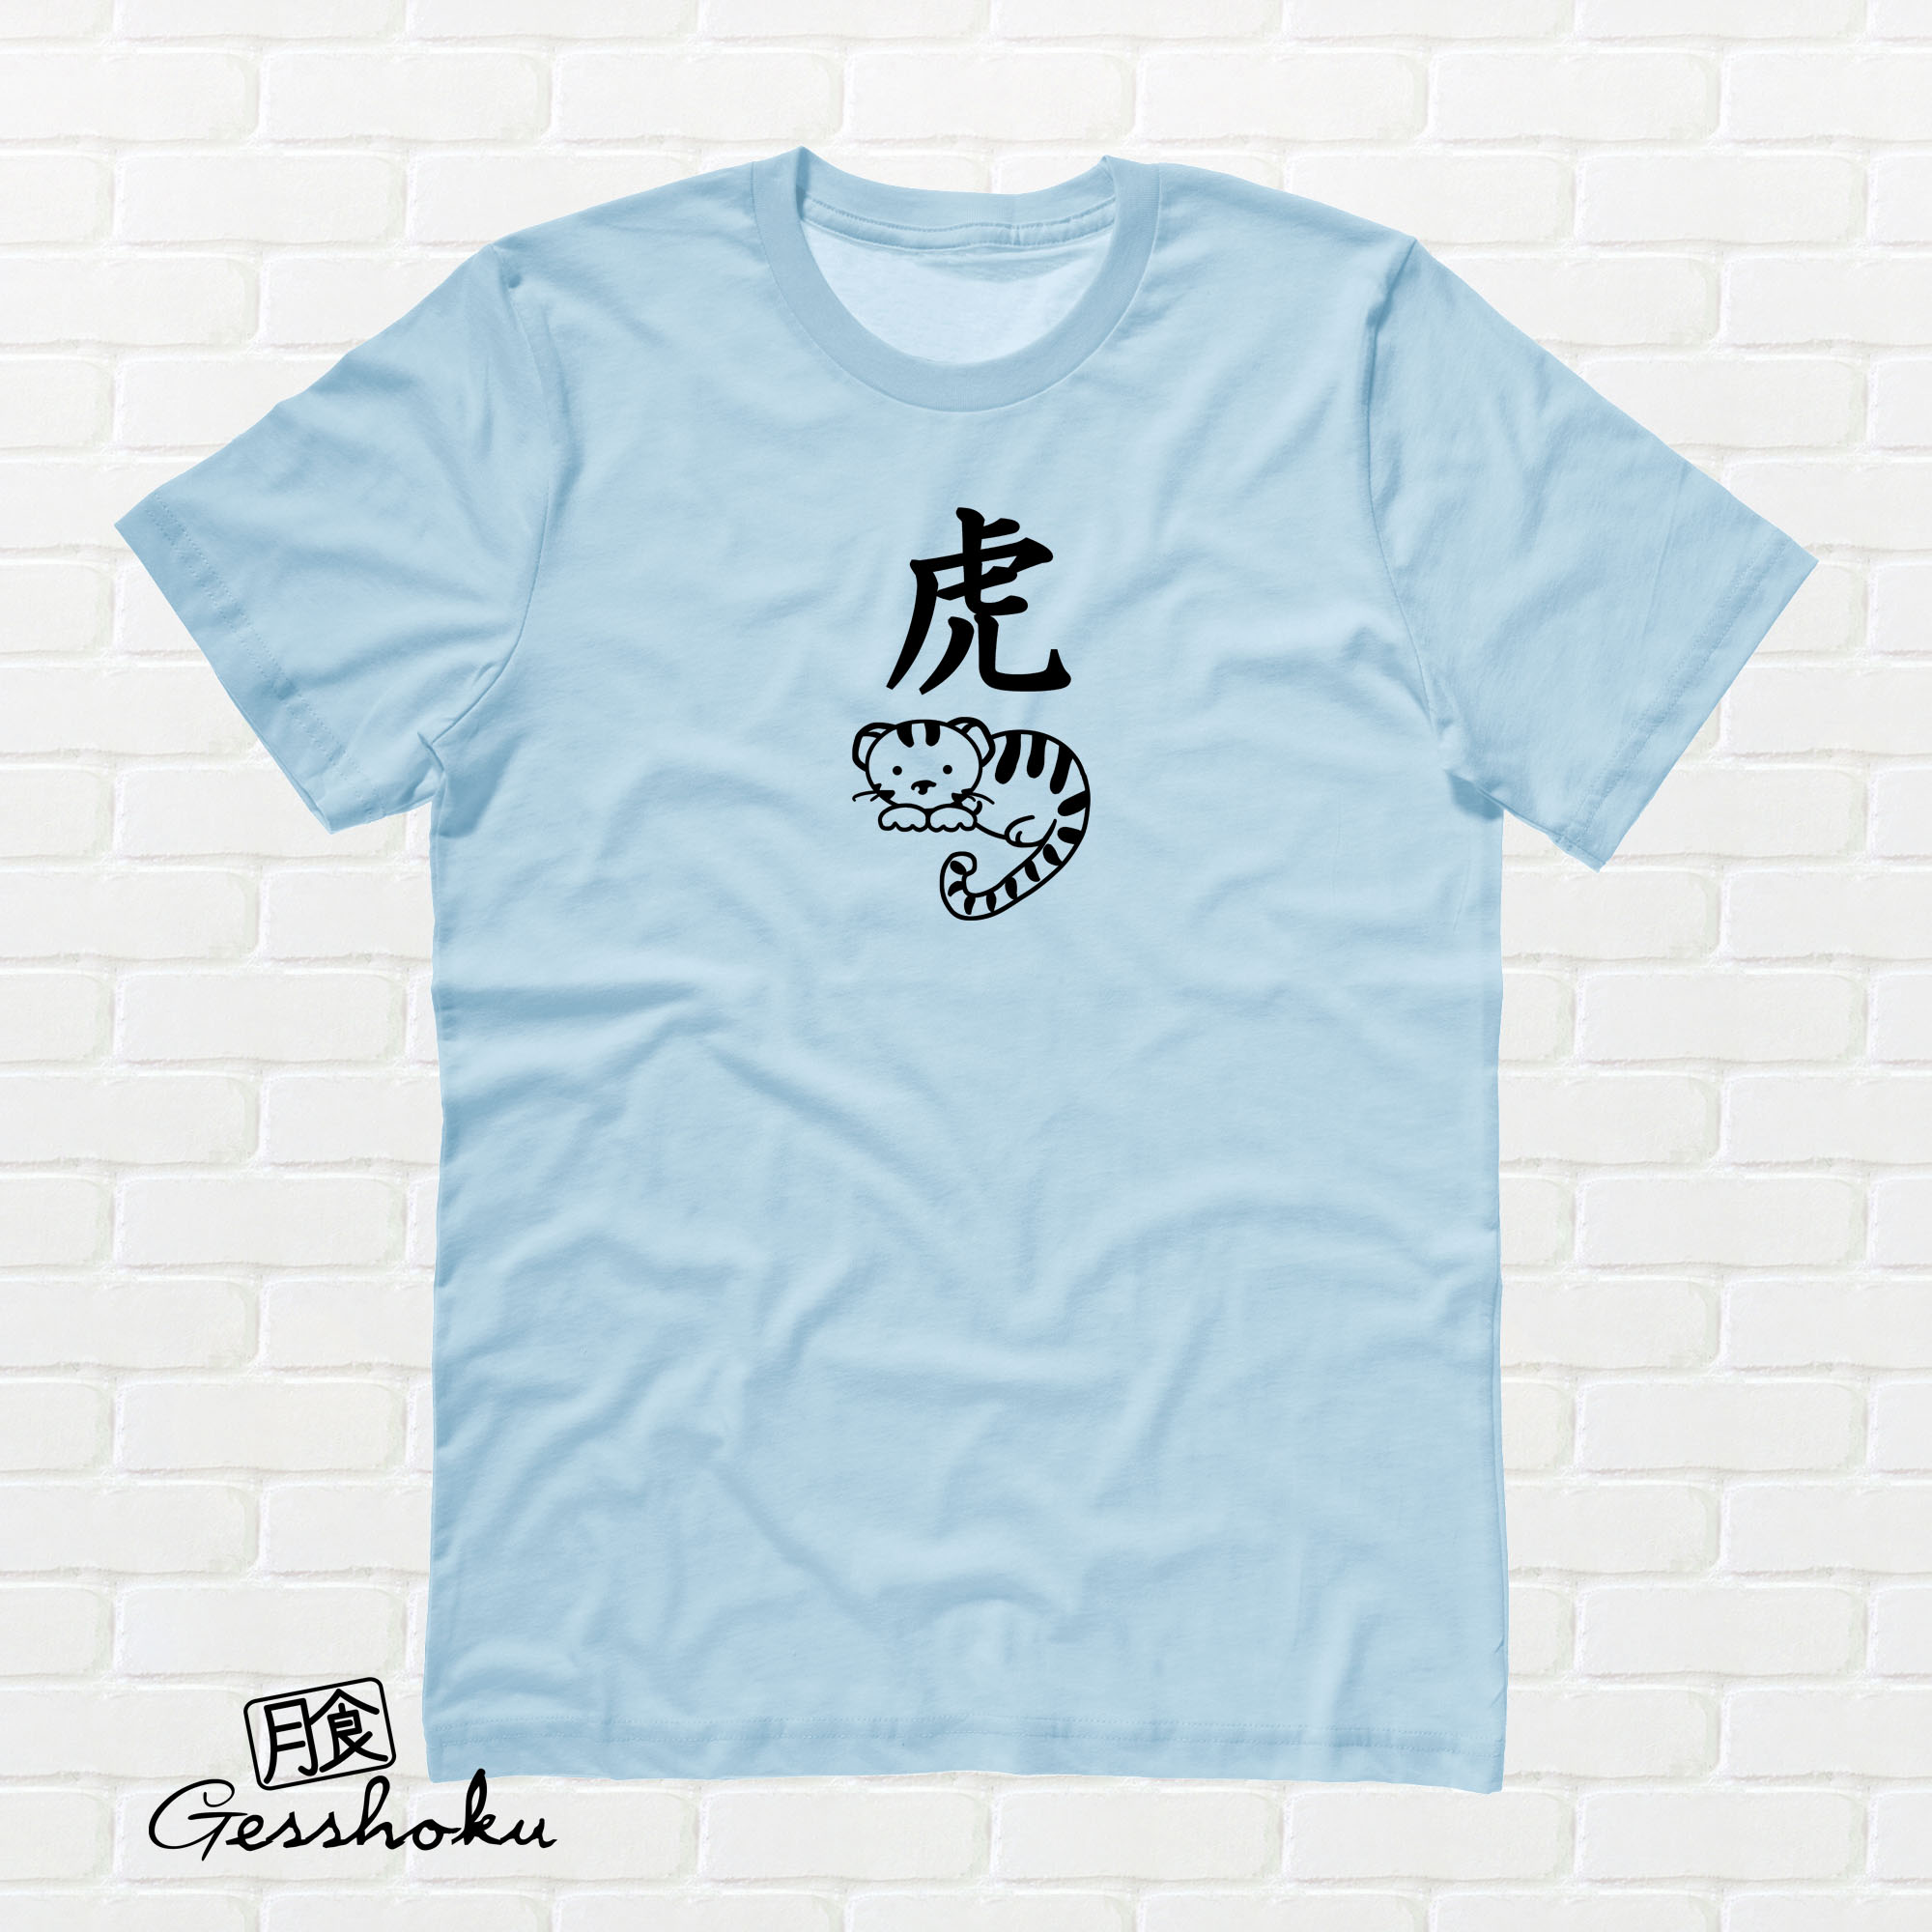 Year of the Tiger Chinese Zodiac T-shirt - Light Blue